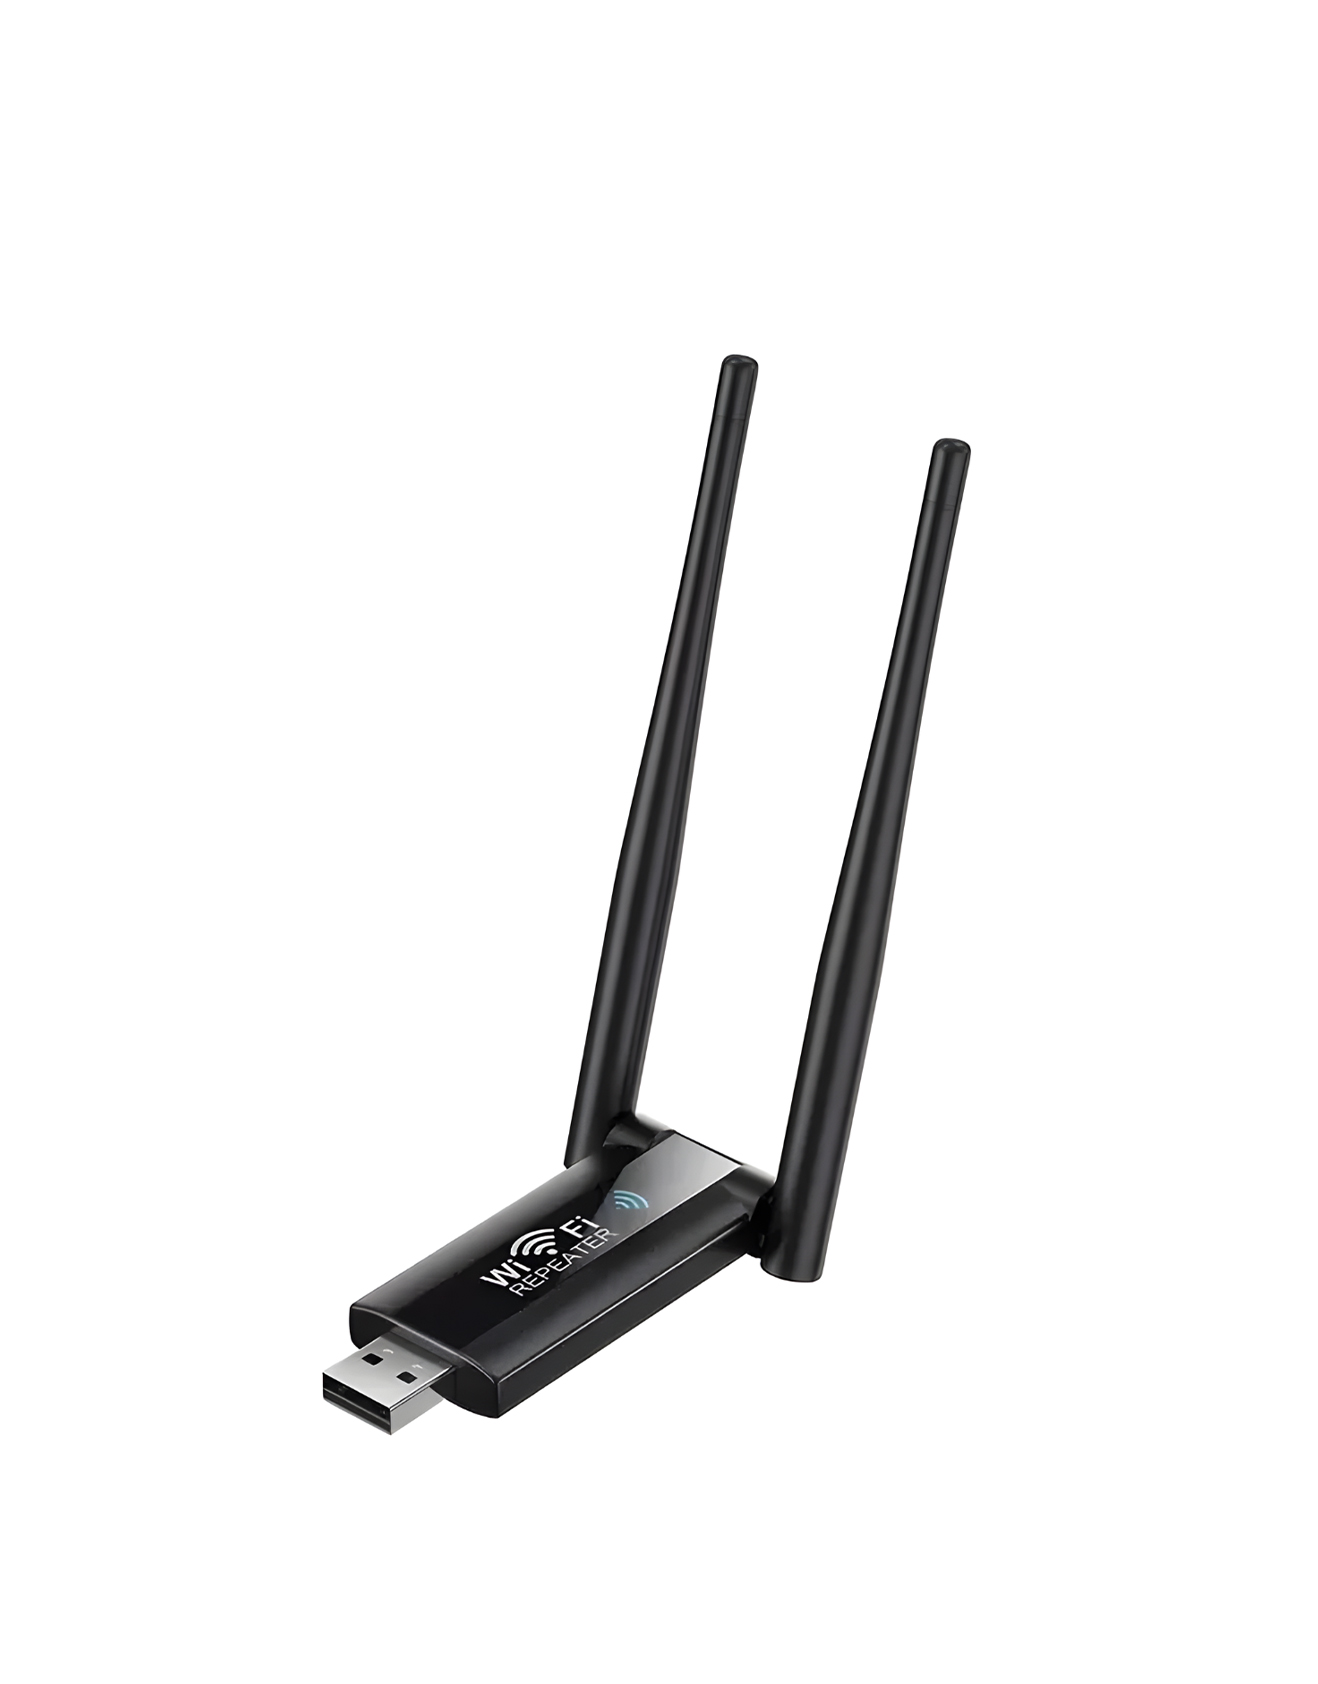 A sleek black wireless router with two antennas for seamless internet connectivity. Stay connected effortlessly!